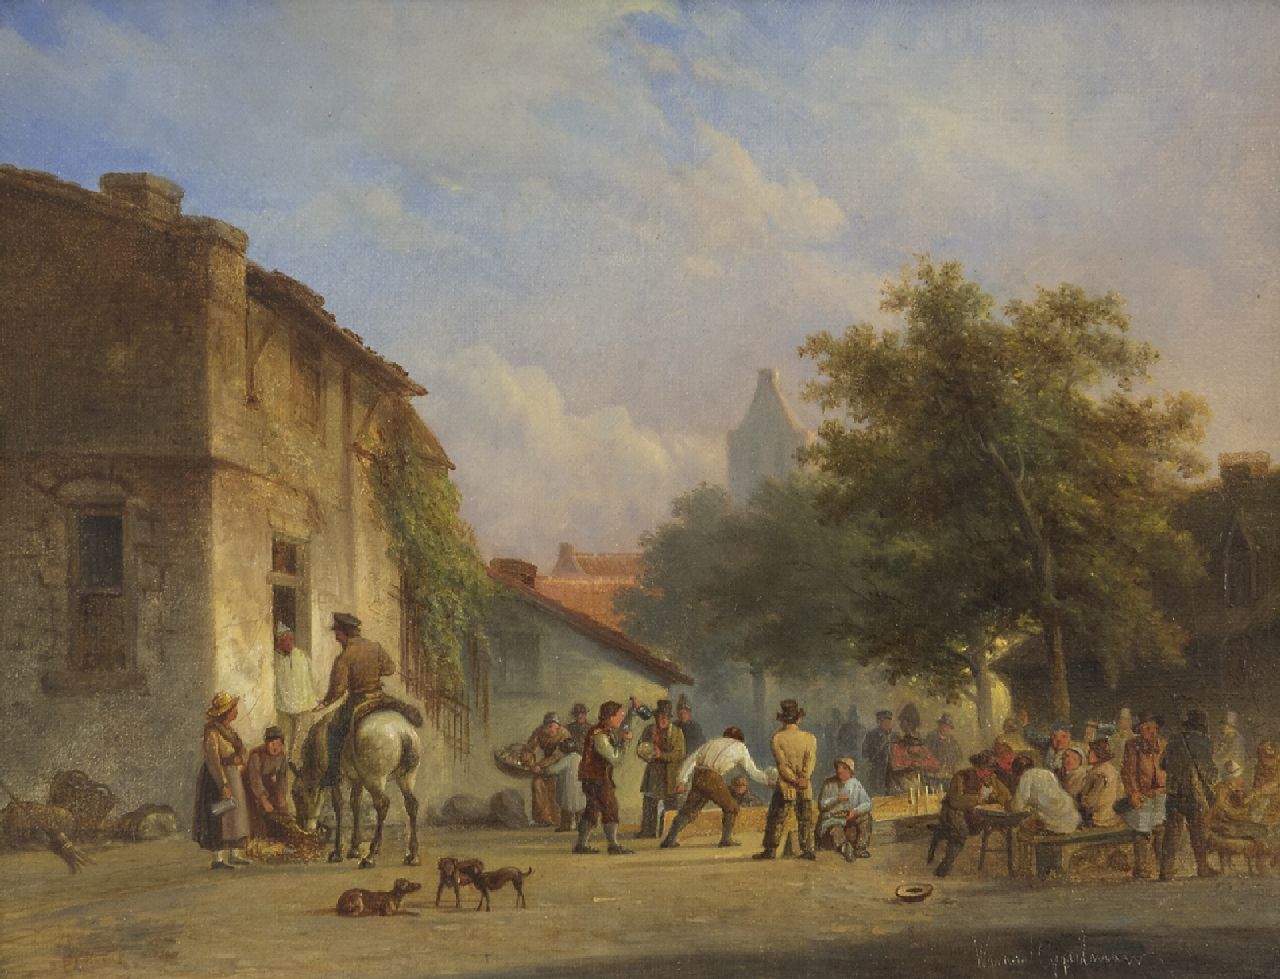 Gijselman W.  | Warner Gijselman | Paintings offered for sale | Playing skittles on the village square, oil on canvas 17.9 x 23.0 cm, signed l.r.